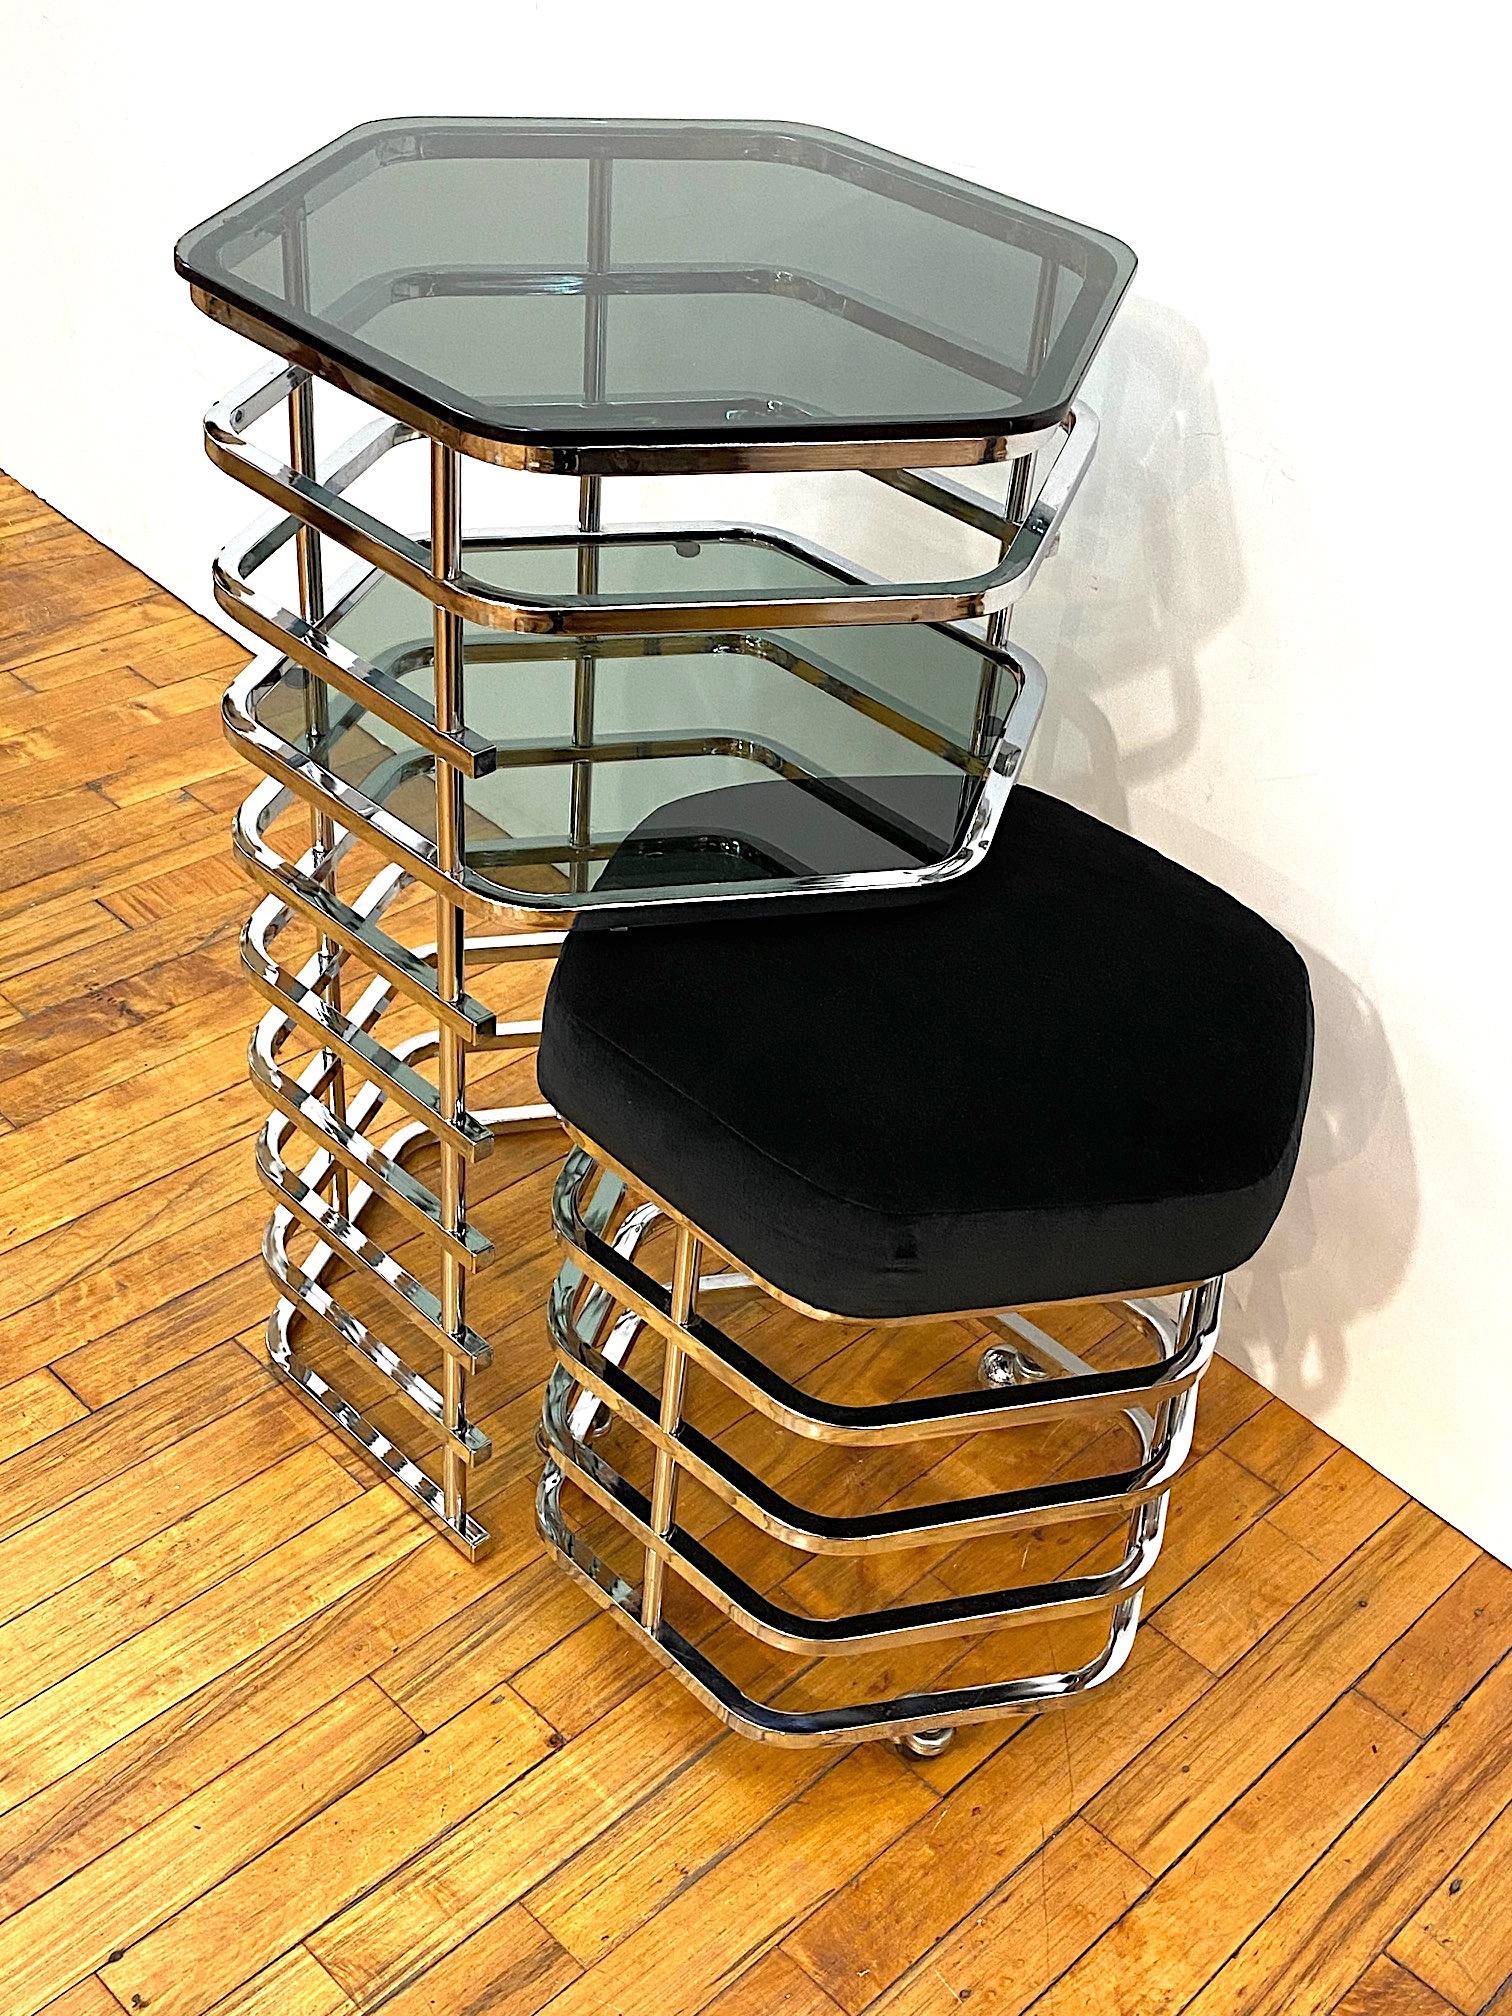 A wonderful midcentury Italian vanity table and stool set from the 1970s. Architectural in the design of a column of ten tiers of chrome bars. Each tier is supported by small round chrome rods allowing for an open and light appearance. The stool has